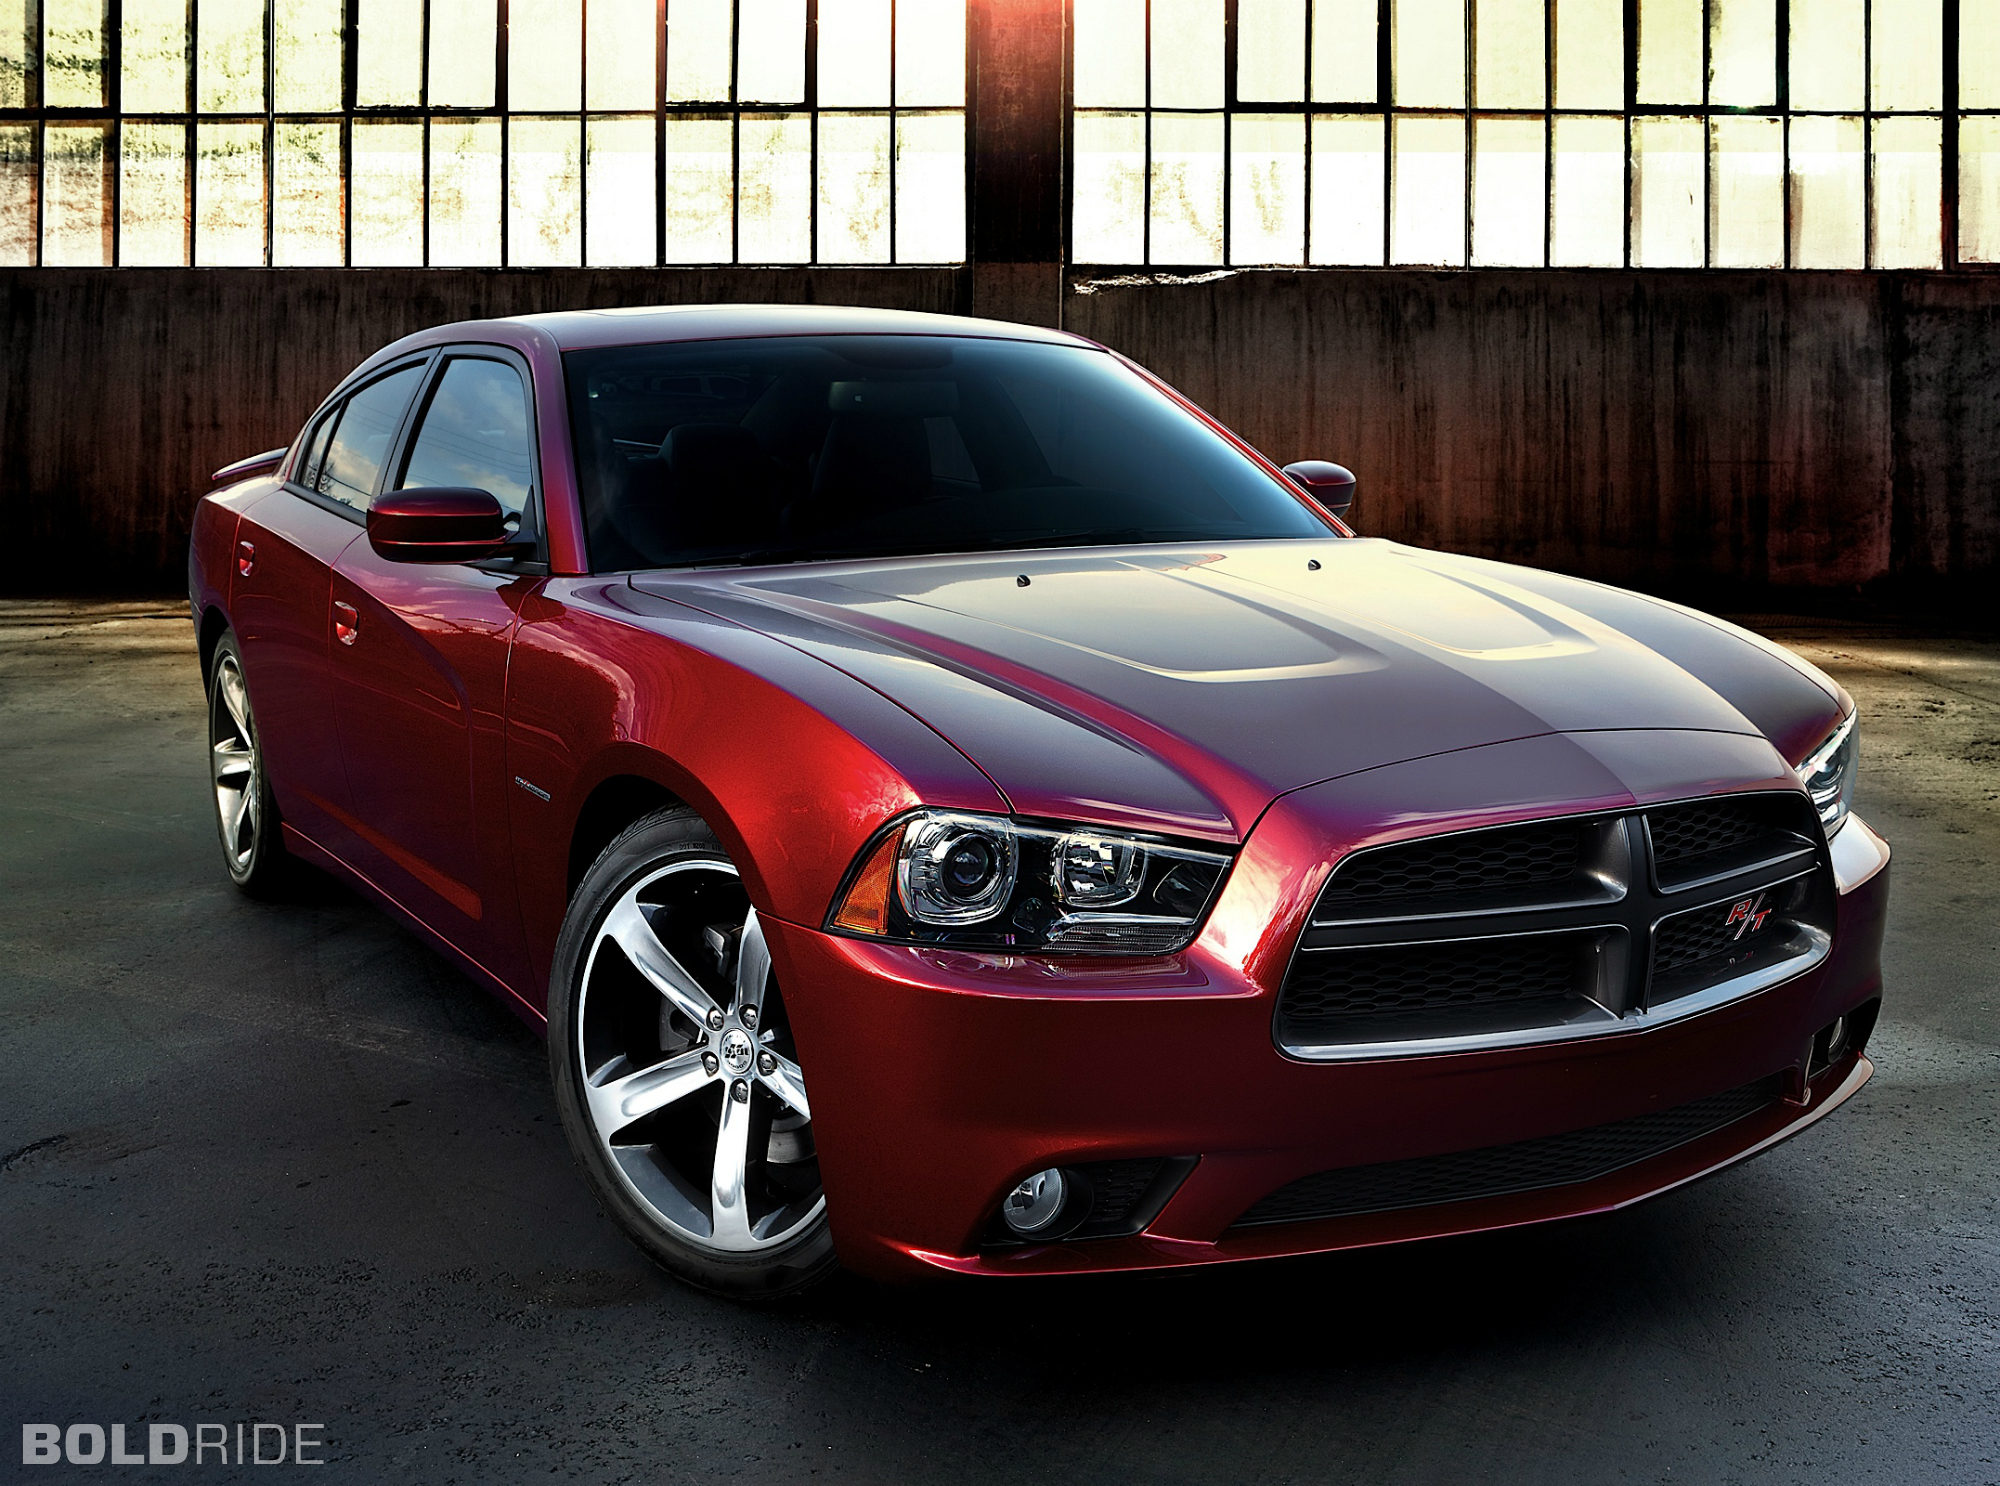 2014, Dodge, Charger, Muscle Wallpaper